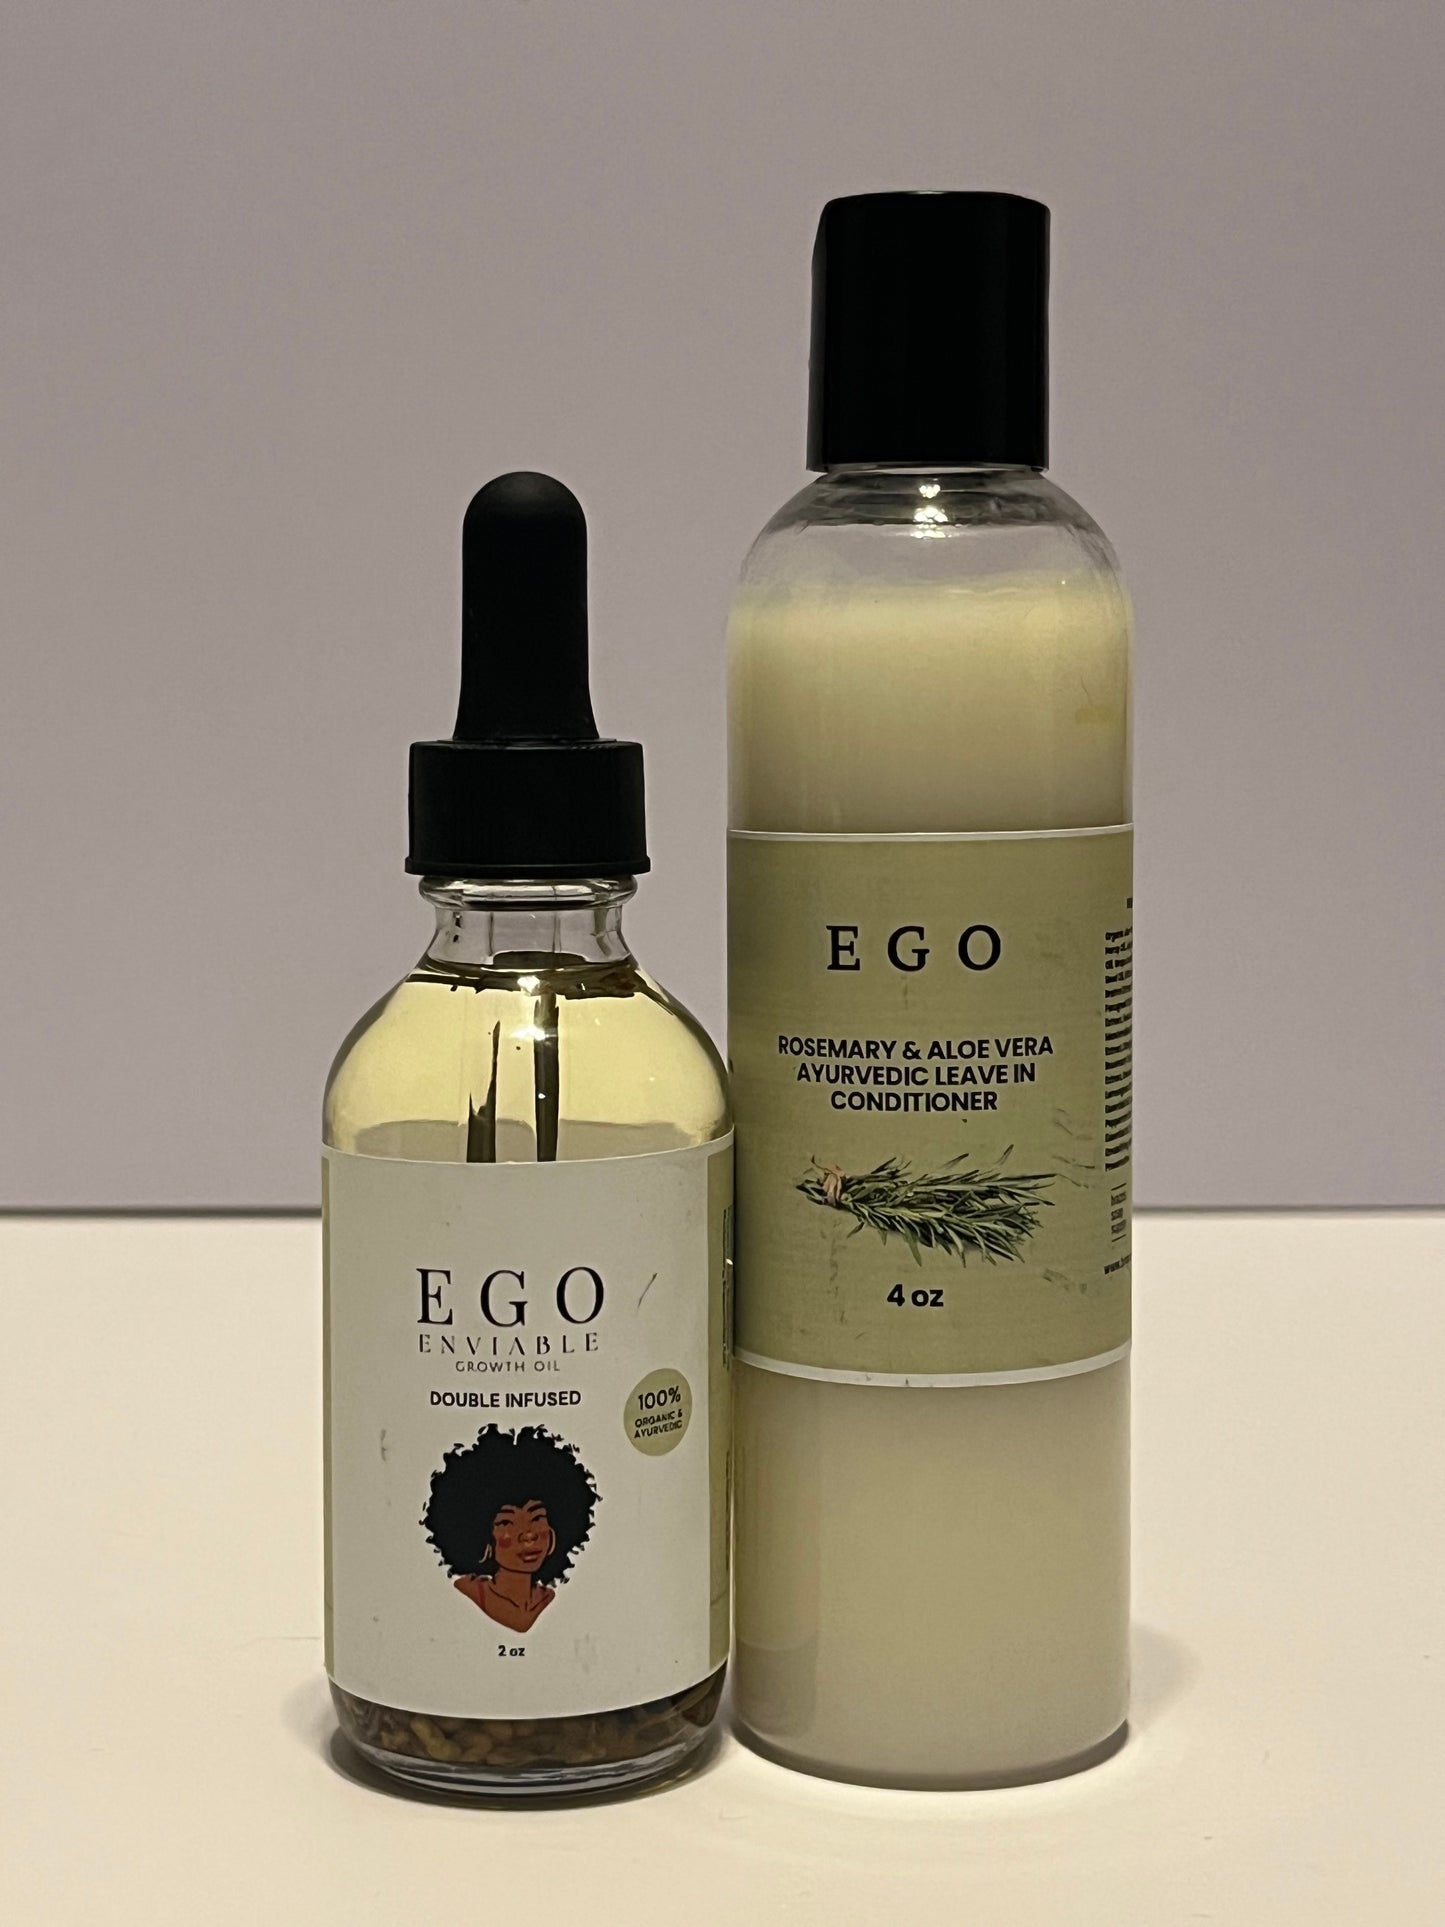 Enviable Growth Oil (EGO)  Double Infused